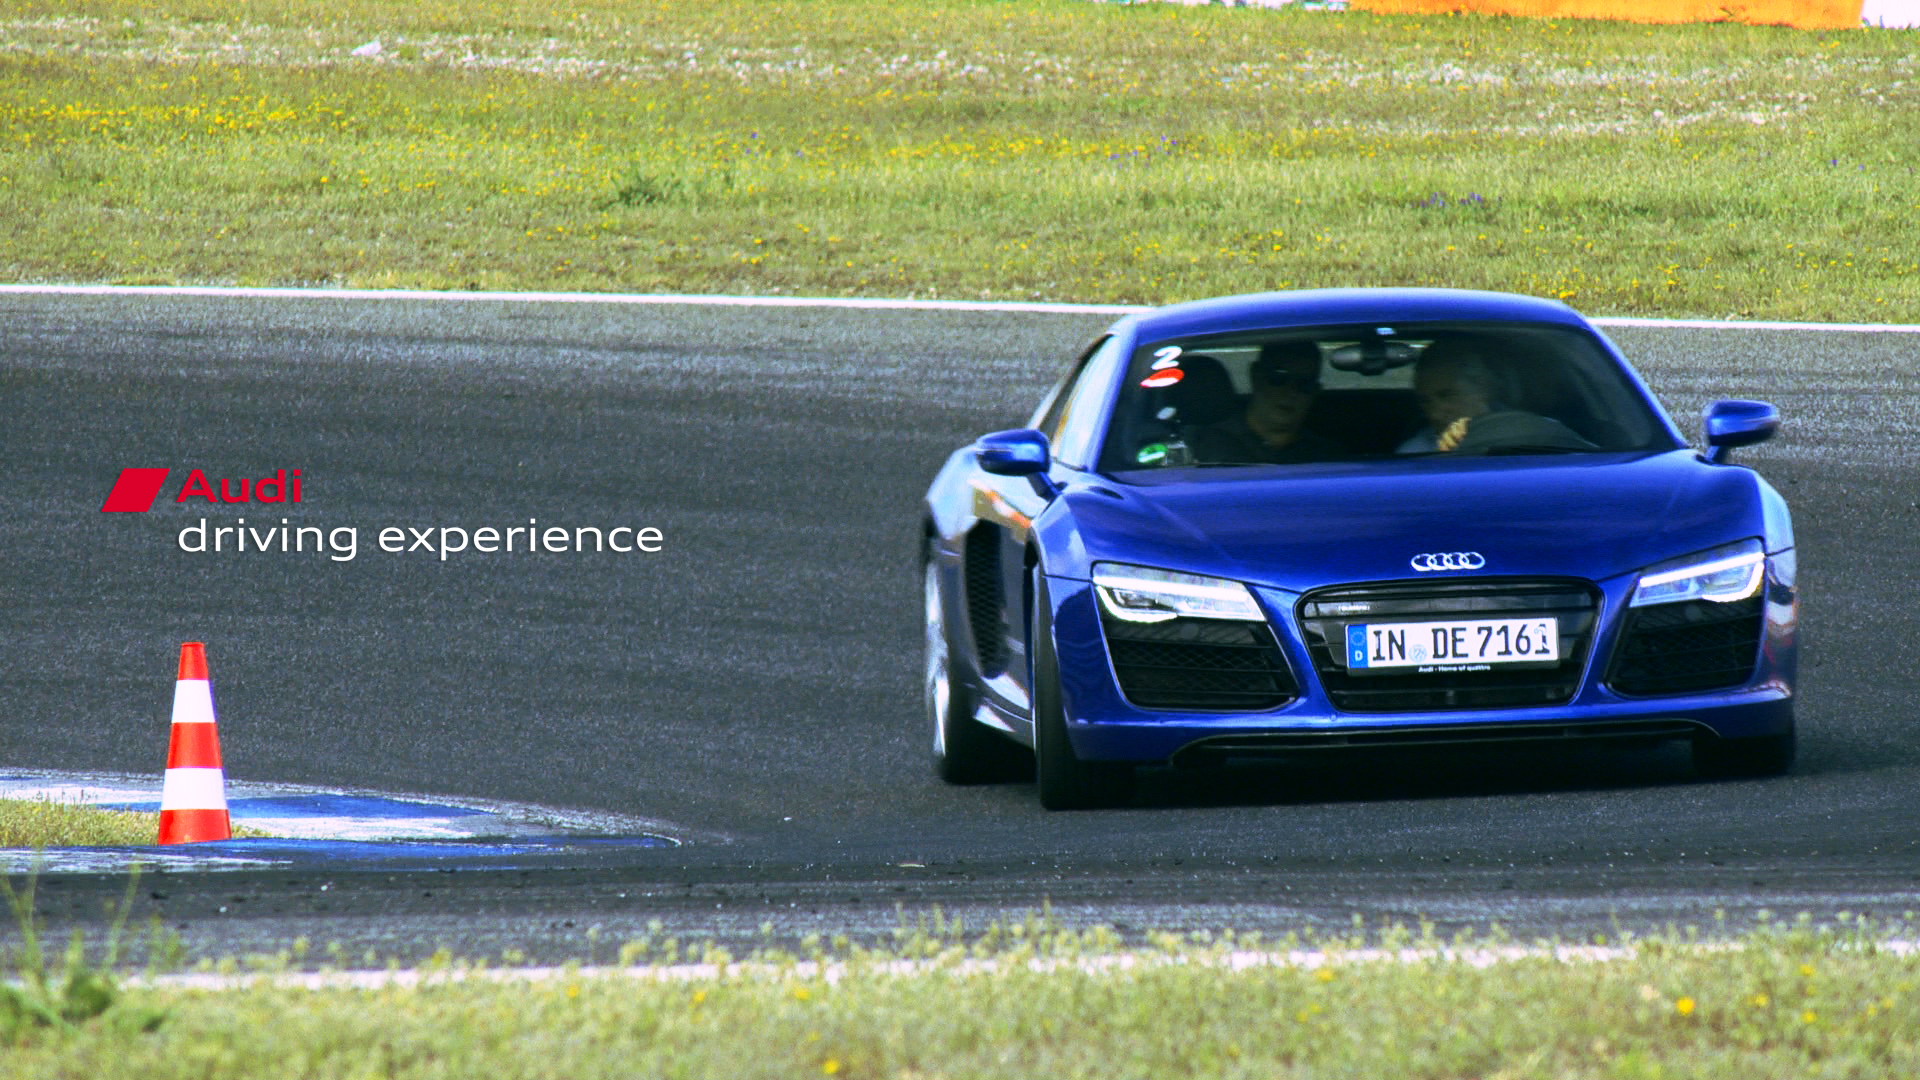 Audi Driving Experience 2015